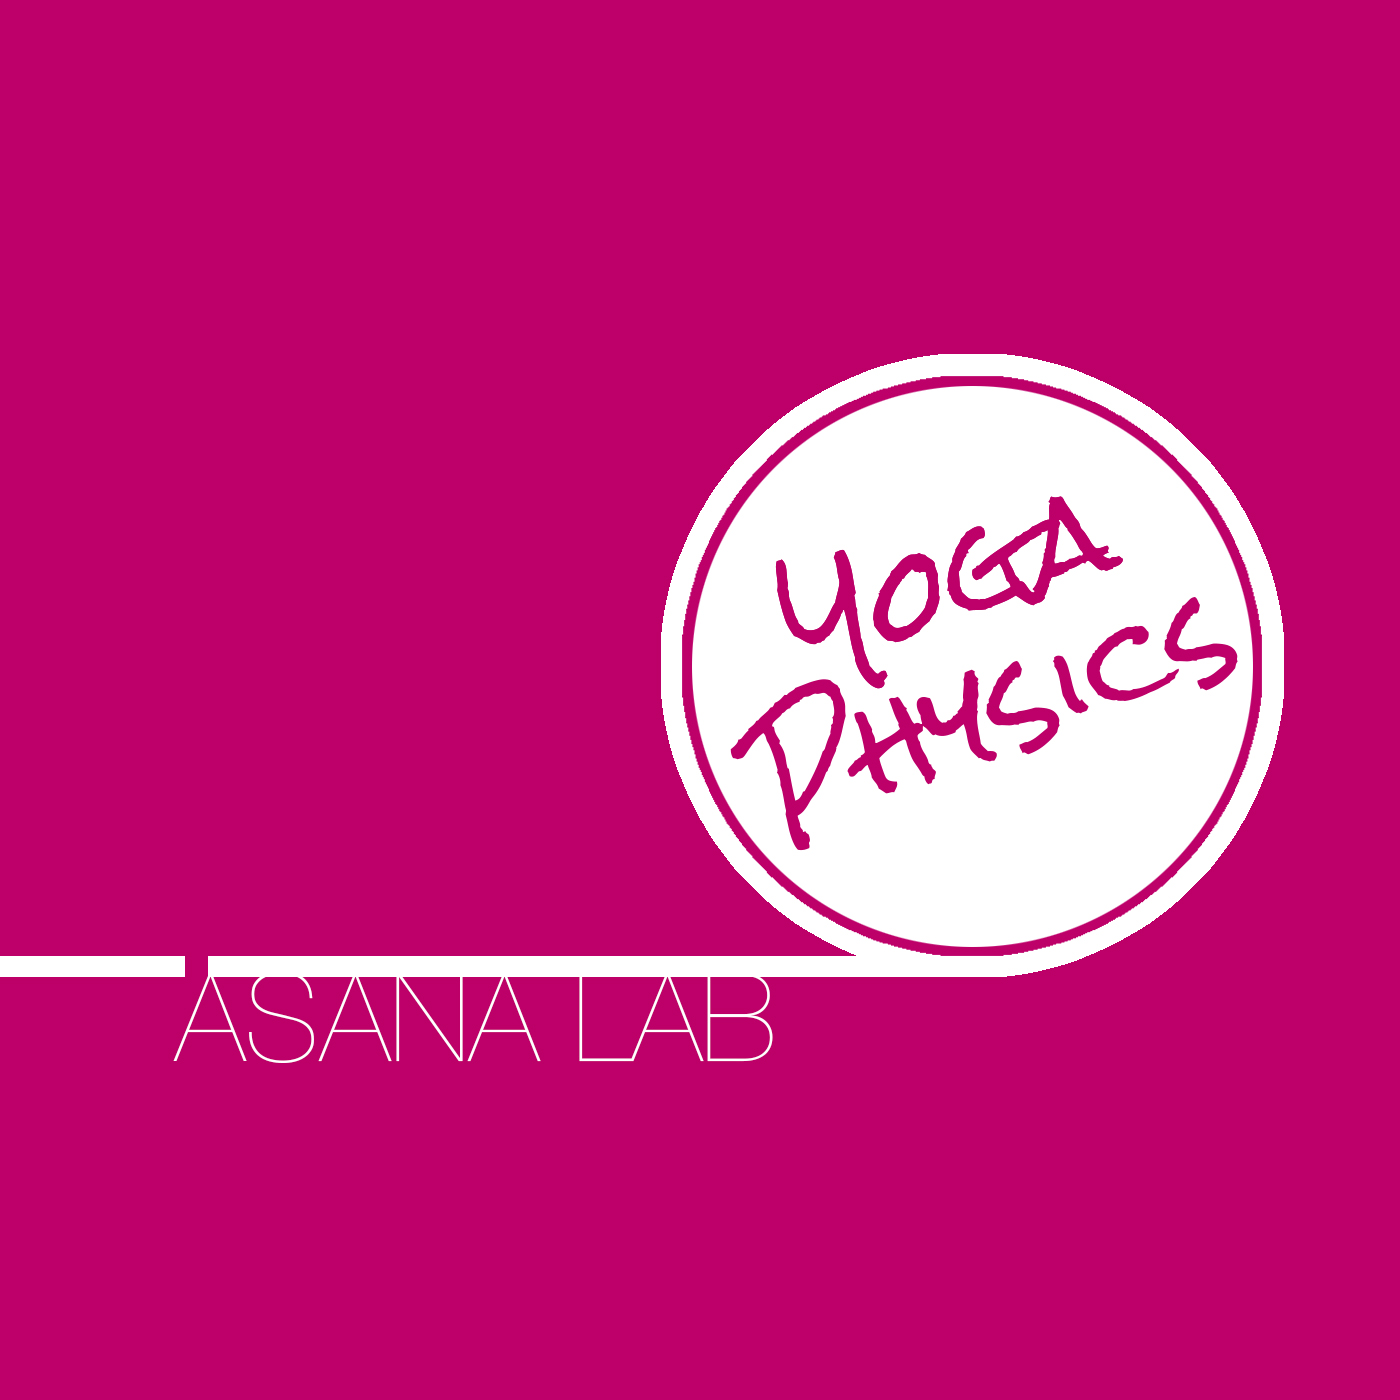 THE ASANA LAB - CHALLENGING THE PARADIGM WITH PROPS